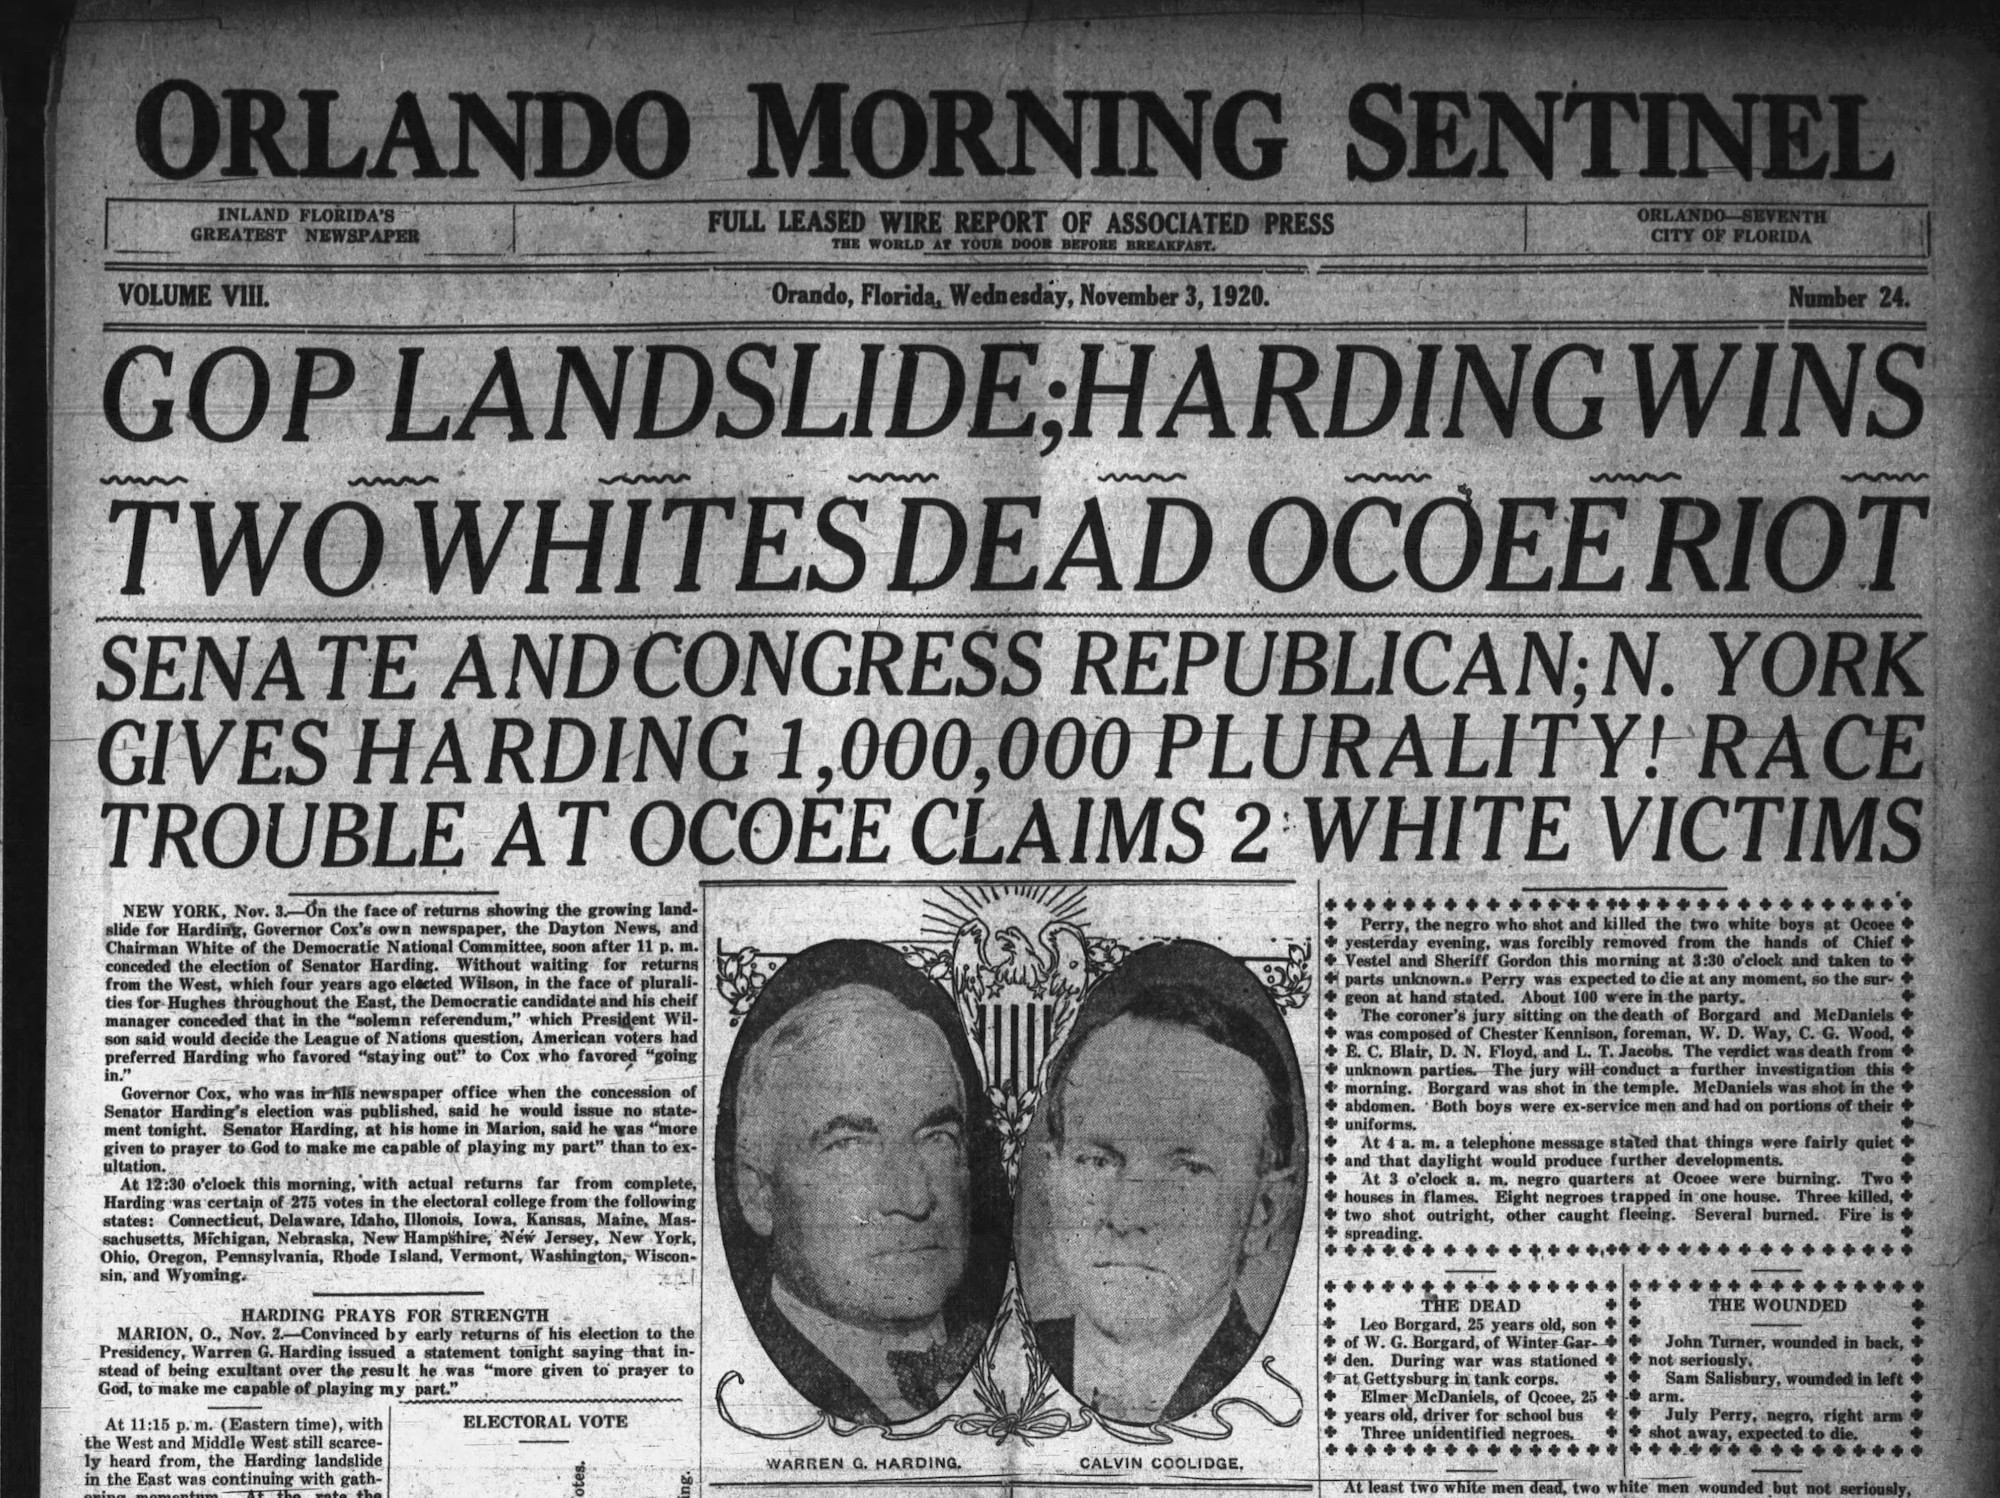 The Orlando Sentinel called the murders a 'race riot' and reported two white live were lost – no mention of the deaths of 35 Black Ocoee citizens. - Photos and documents courtesy Orange County Regional History Center